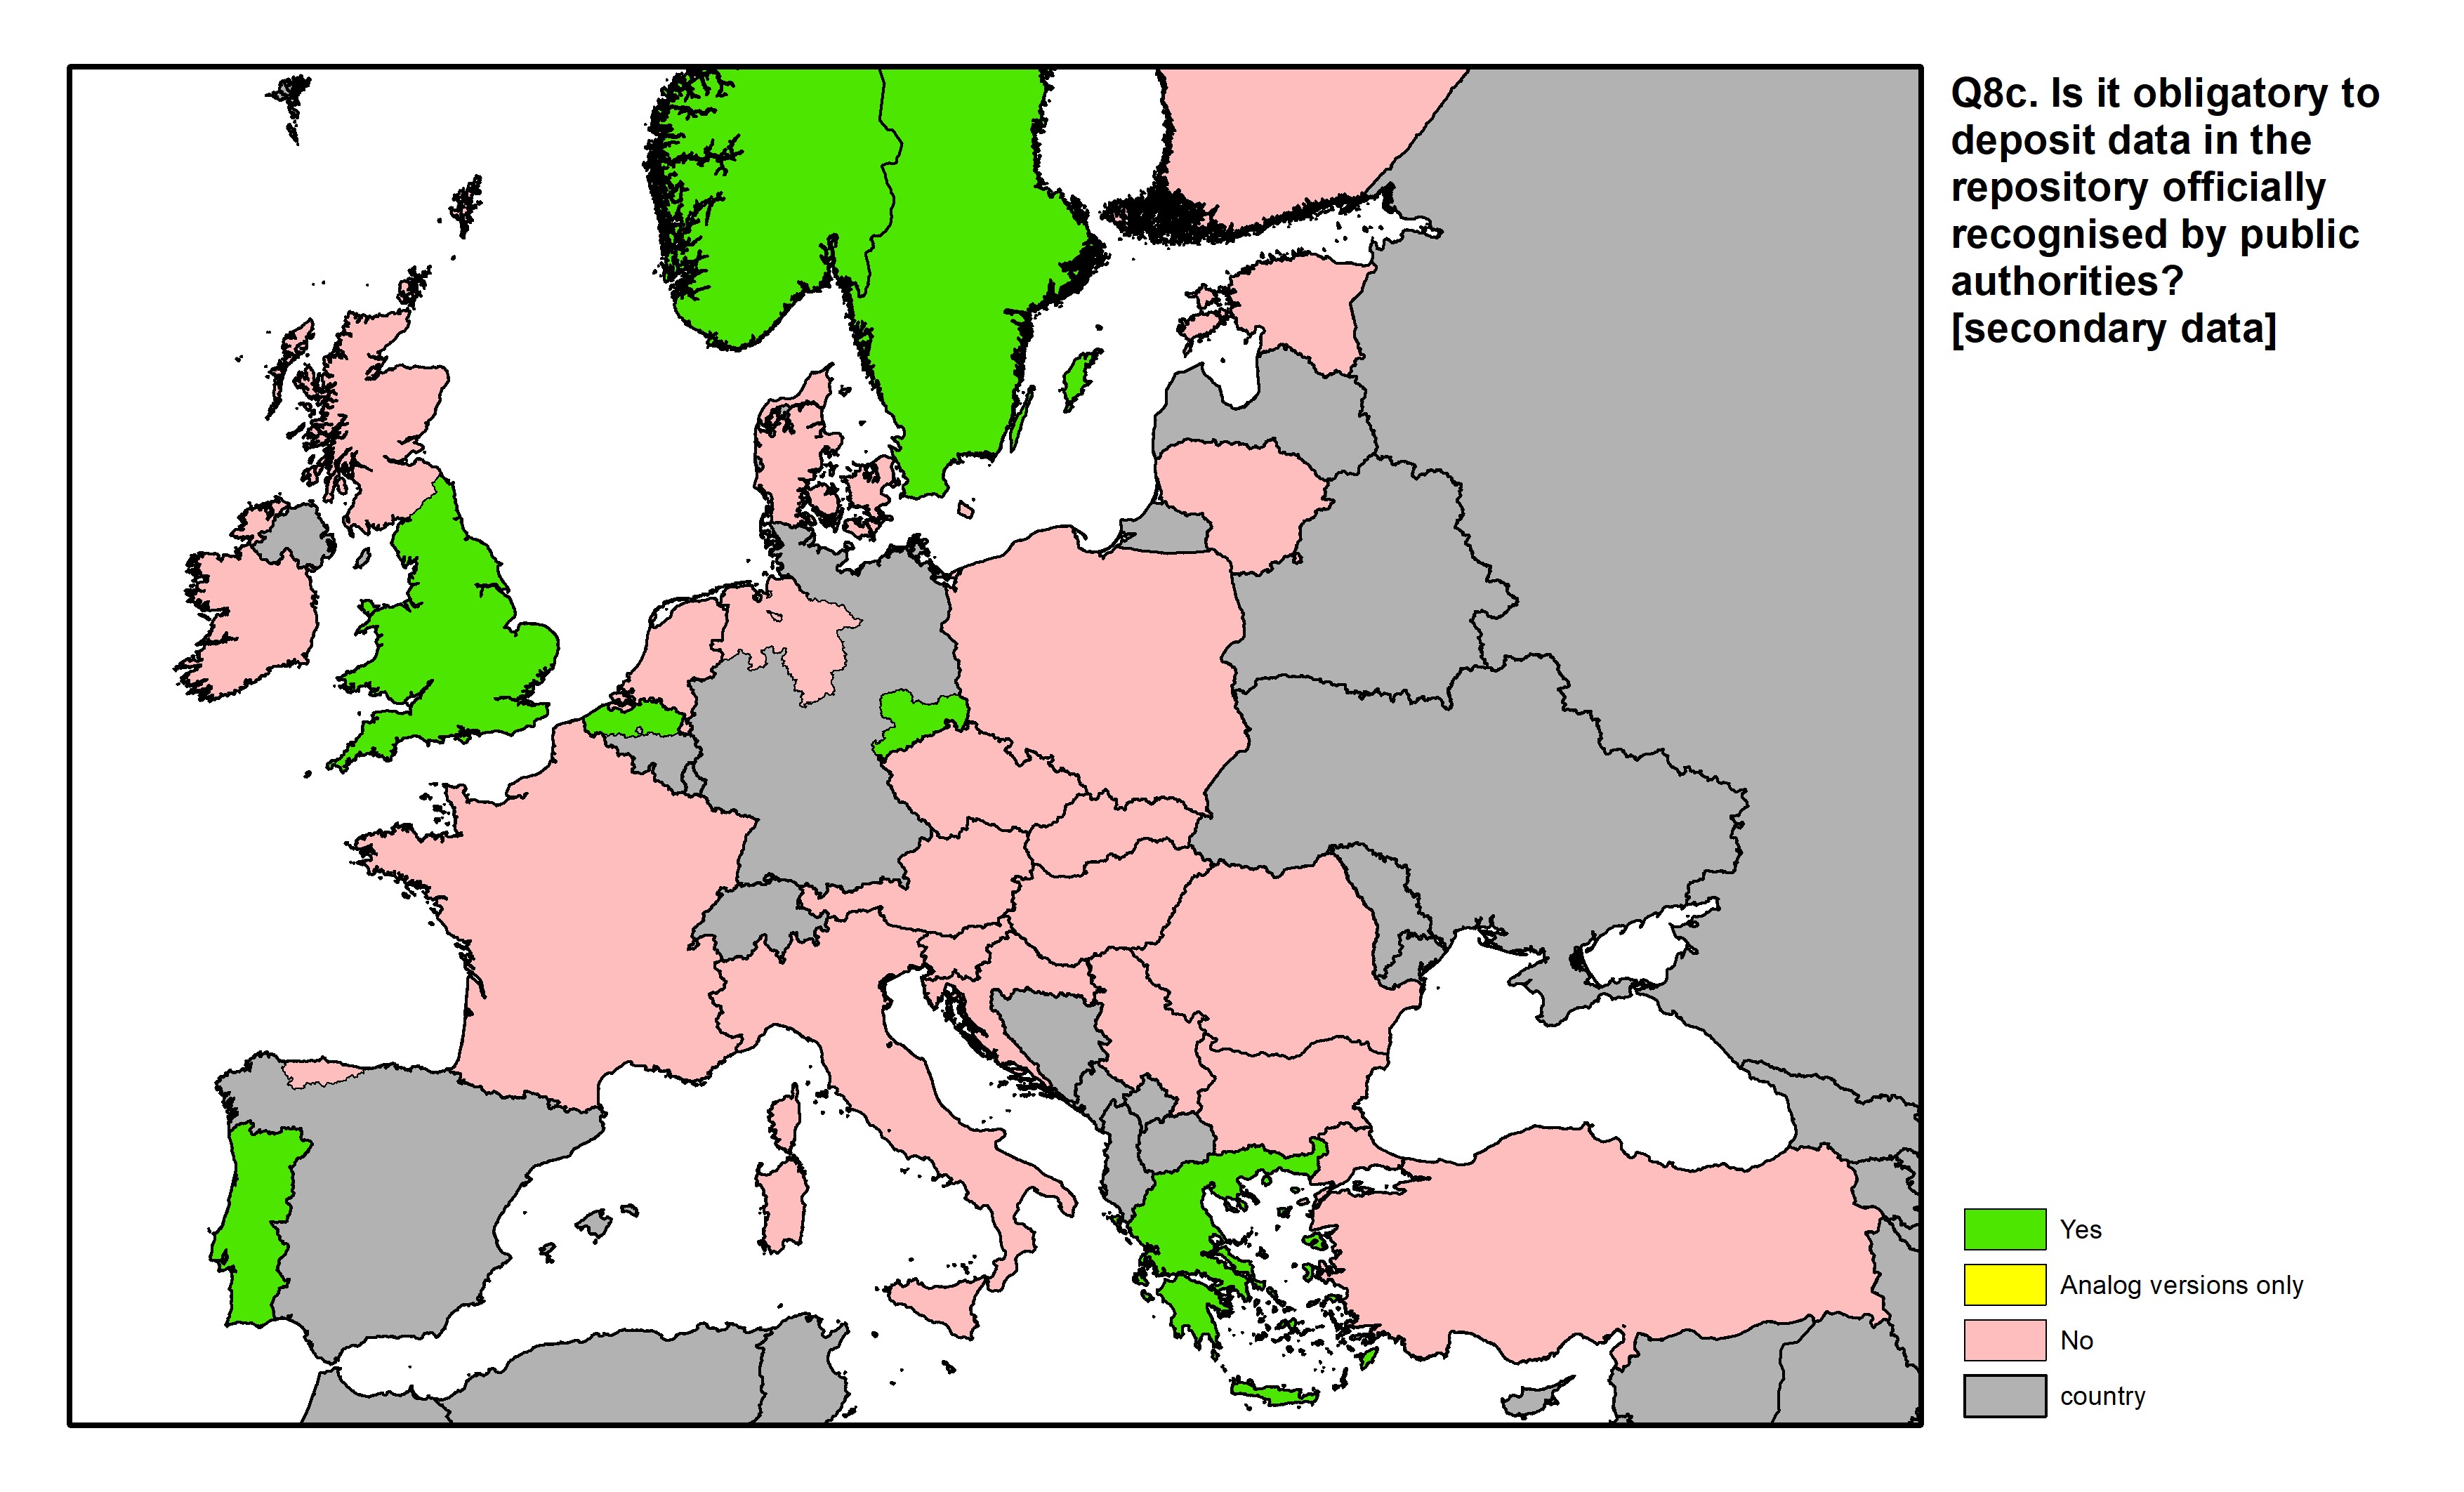 Figure 26: a map of Europe showing countries and regions in colour based on response rates to the survey question.